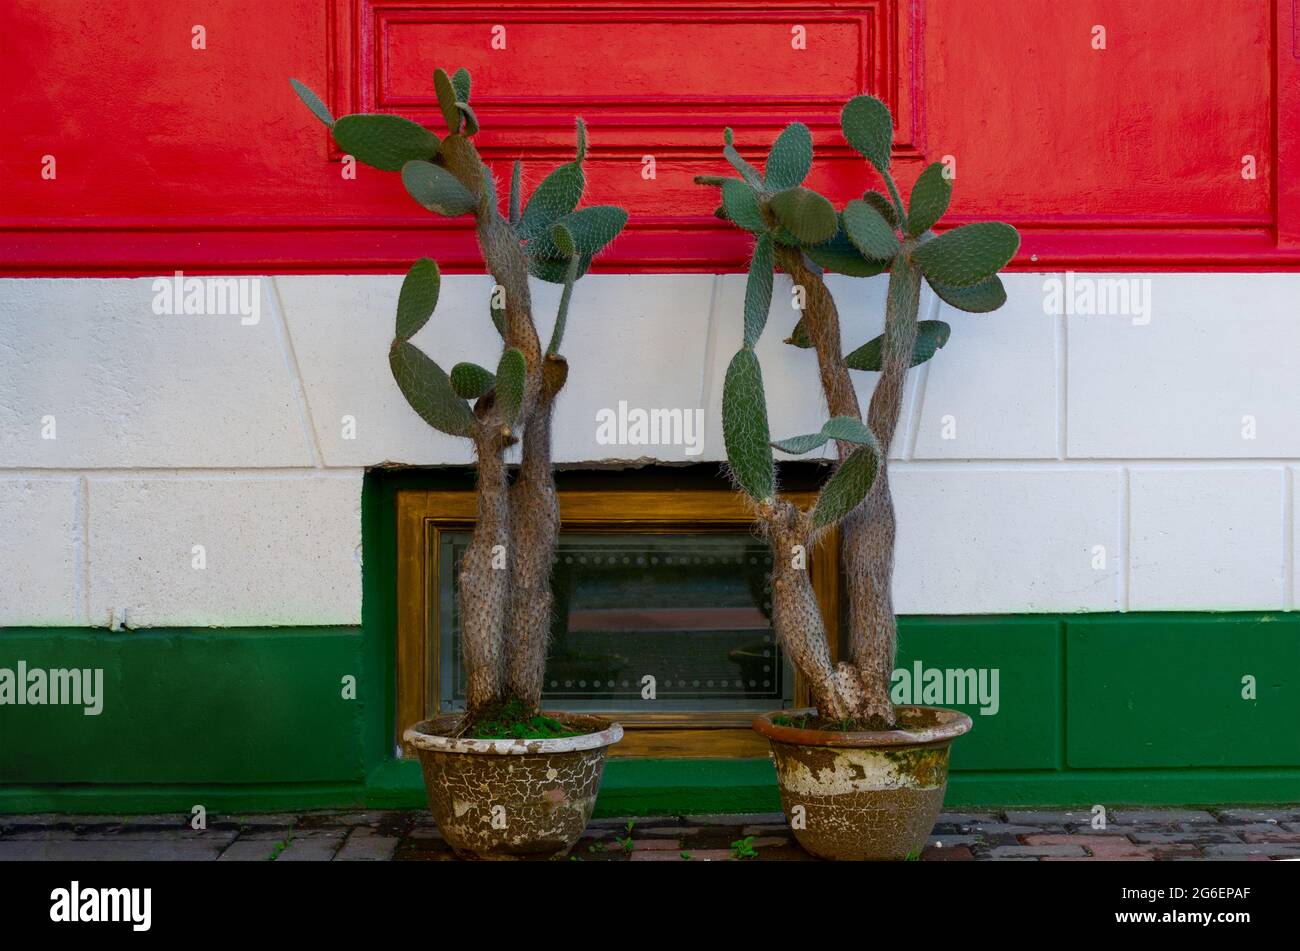 Colorful wall in red white green horizontal stripes. Wall with cacti flower in Mexican flag colors. Hungary flag painted at the wall. Stock Photo